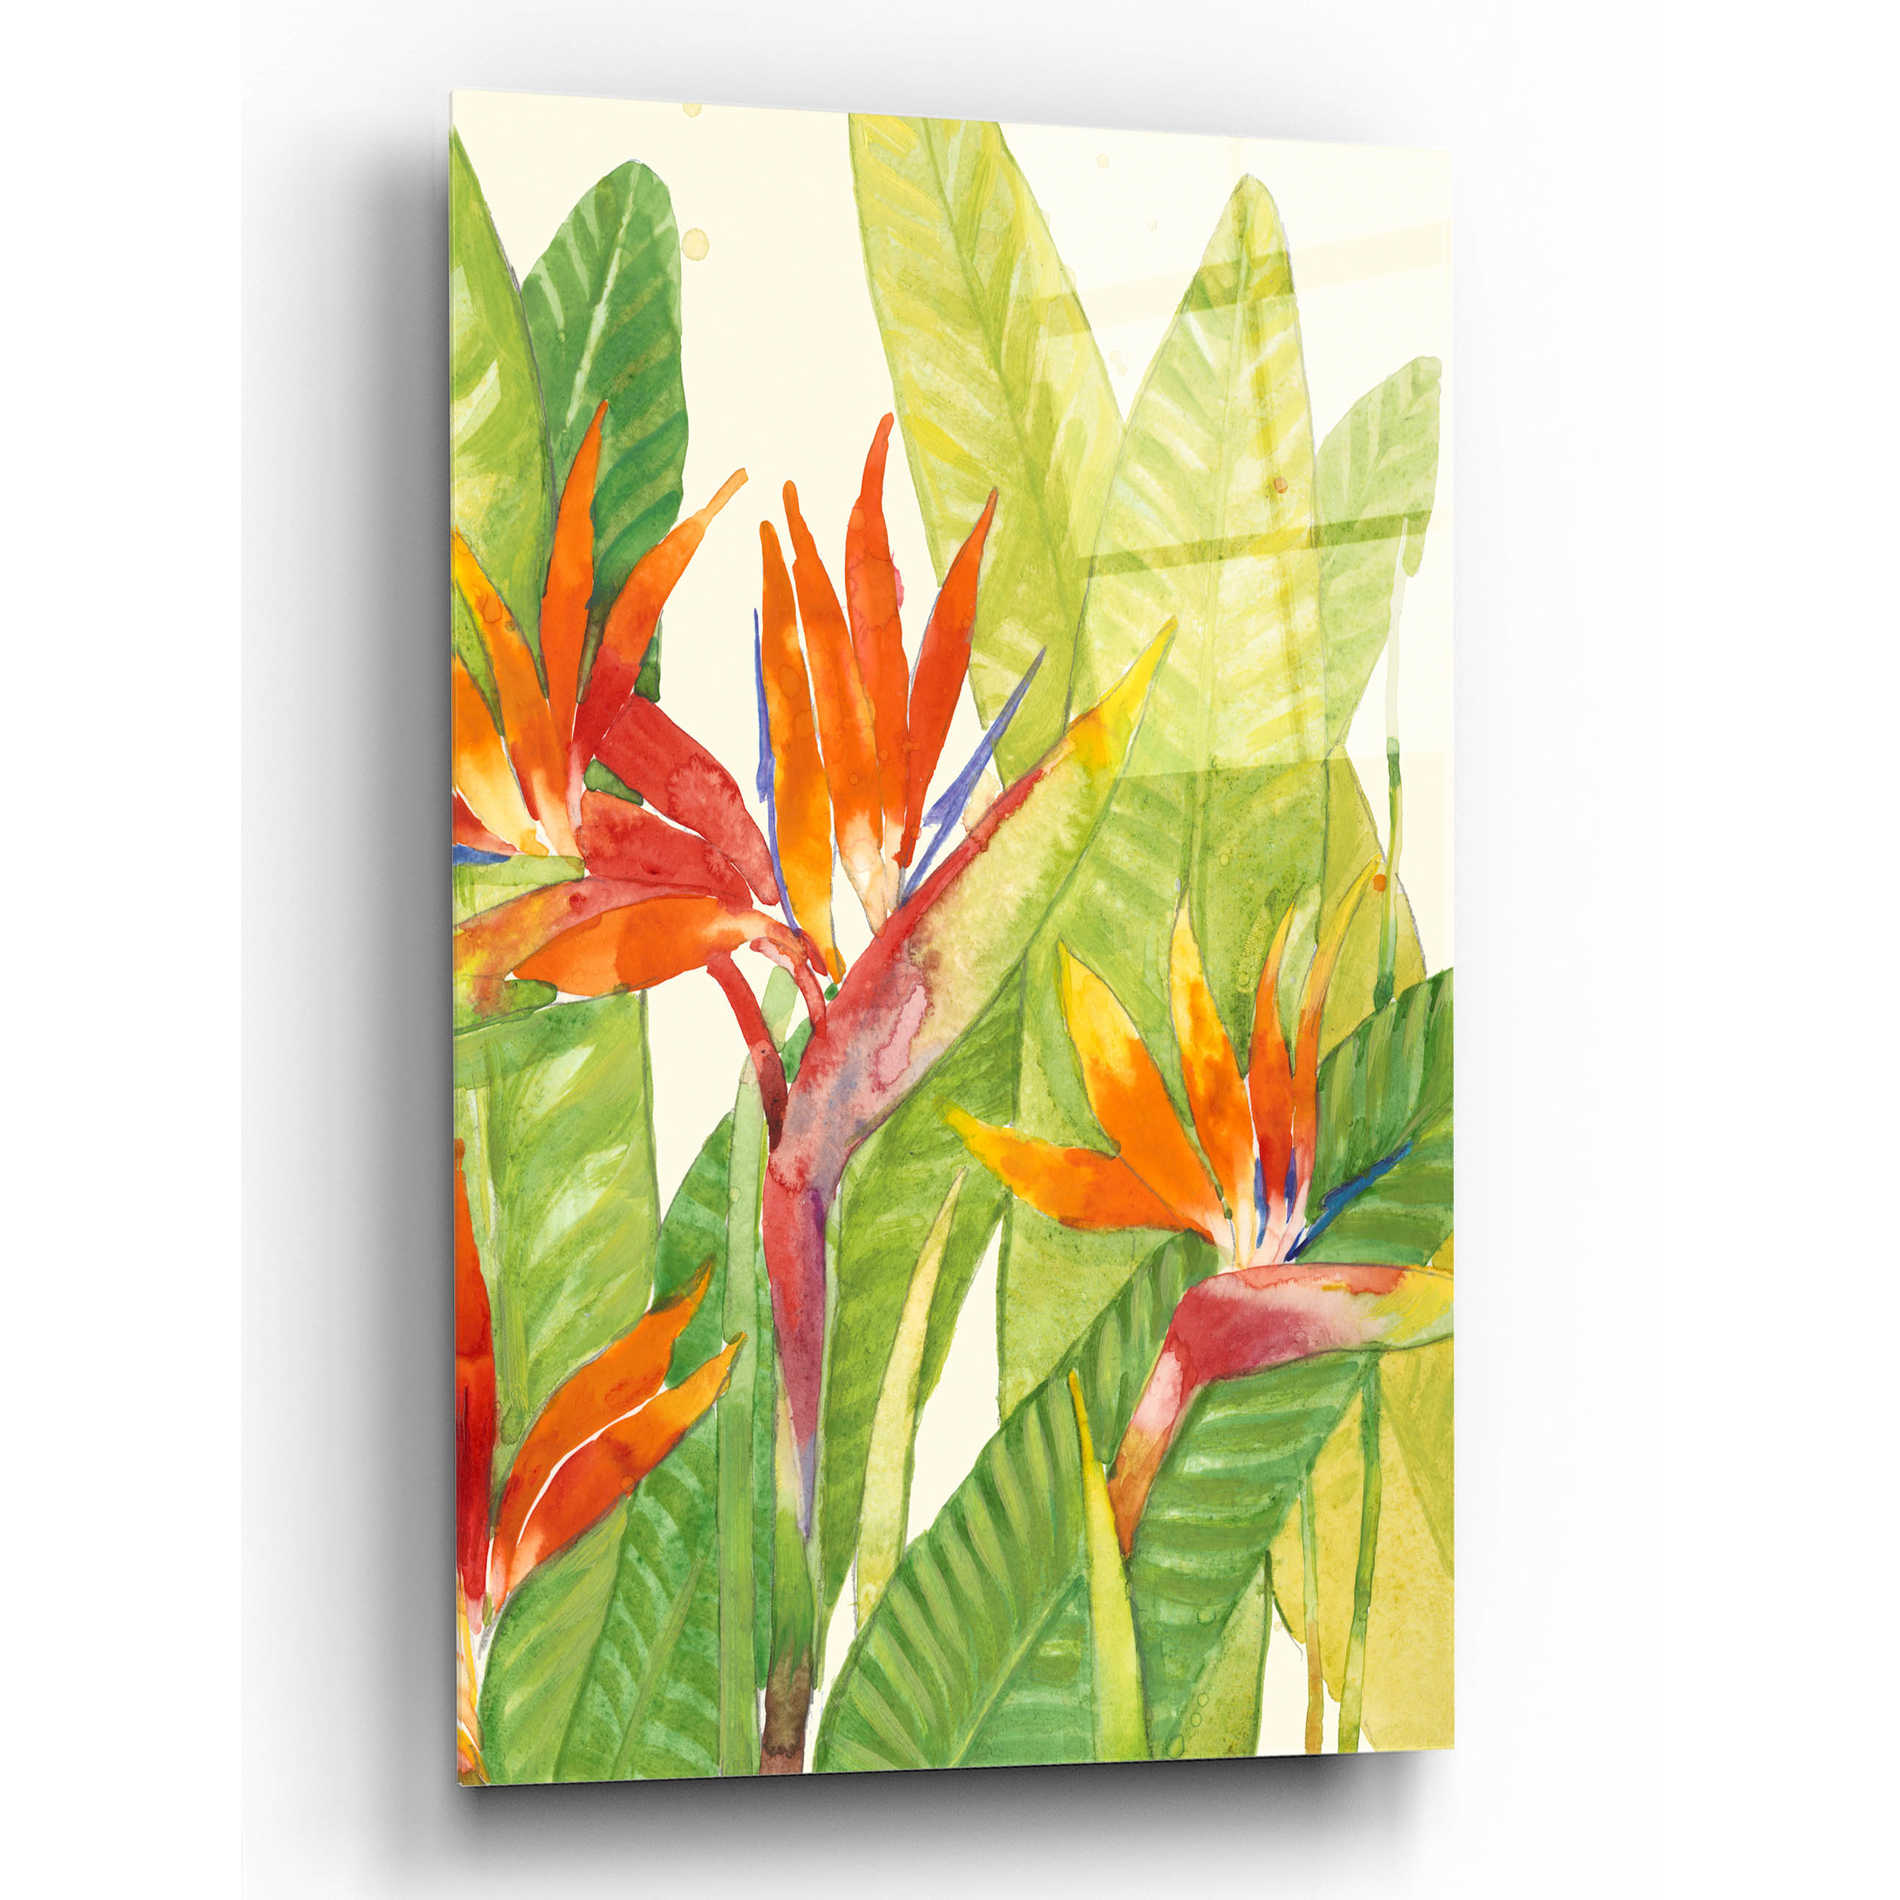 Epic Art 'Watercolor Tropical Flowers IV' by Tim O'Toole, Acrylic Glass Wall Art,12x16